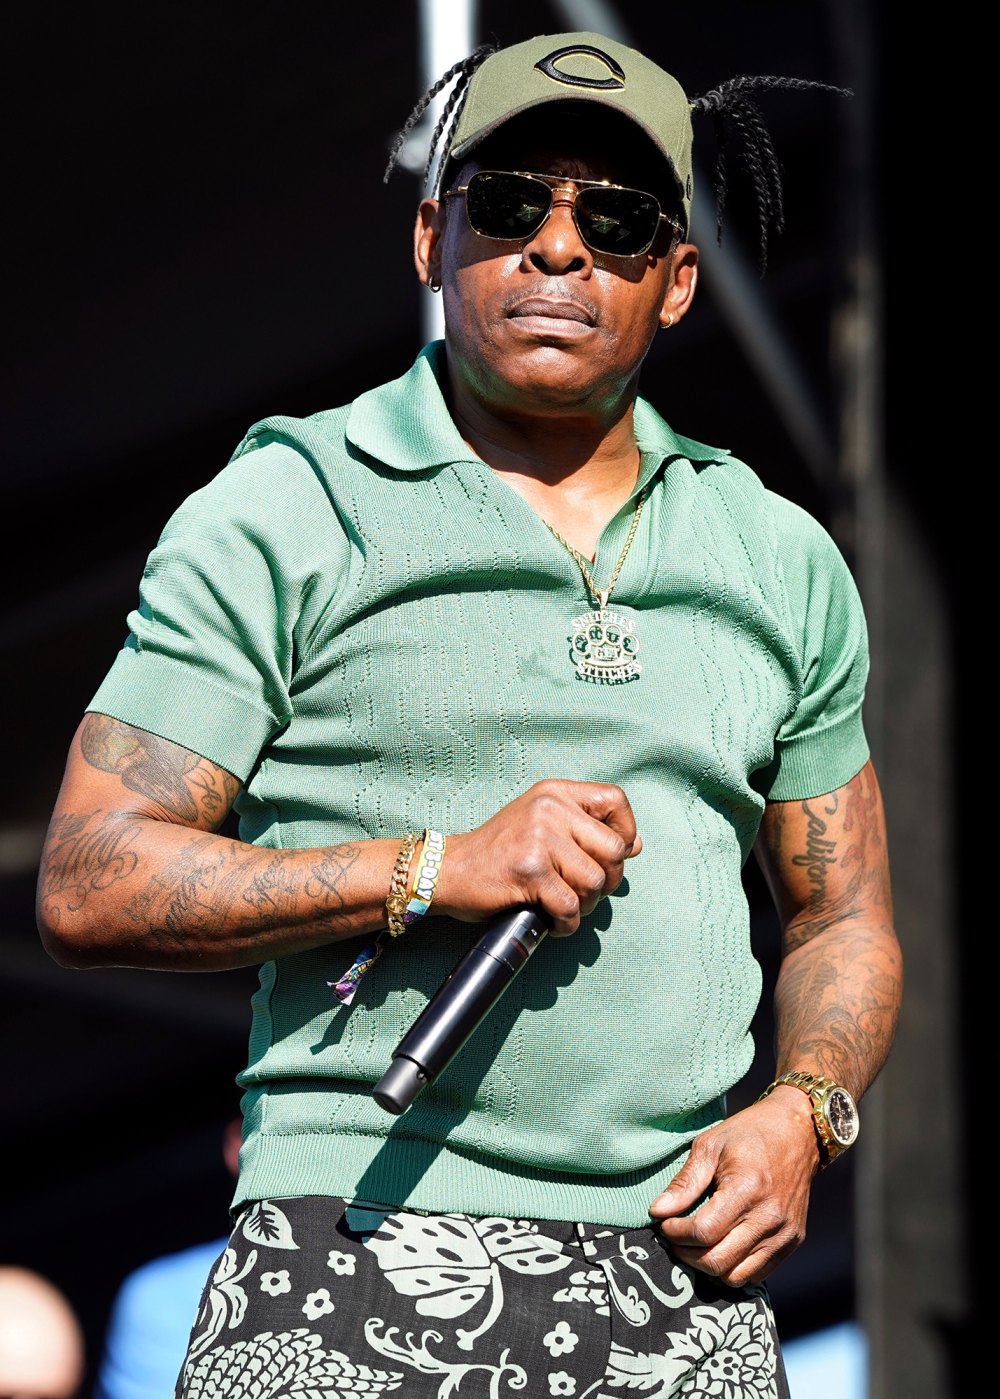 Coolio's Official Cause of Death Revealed: Details